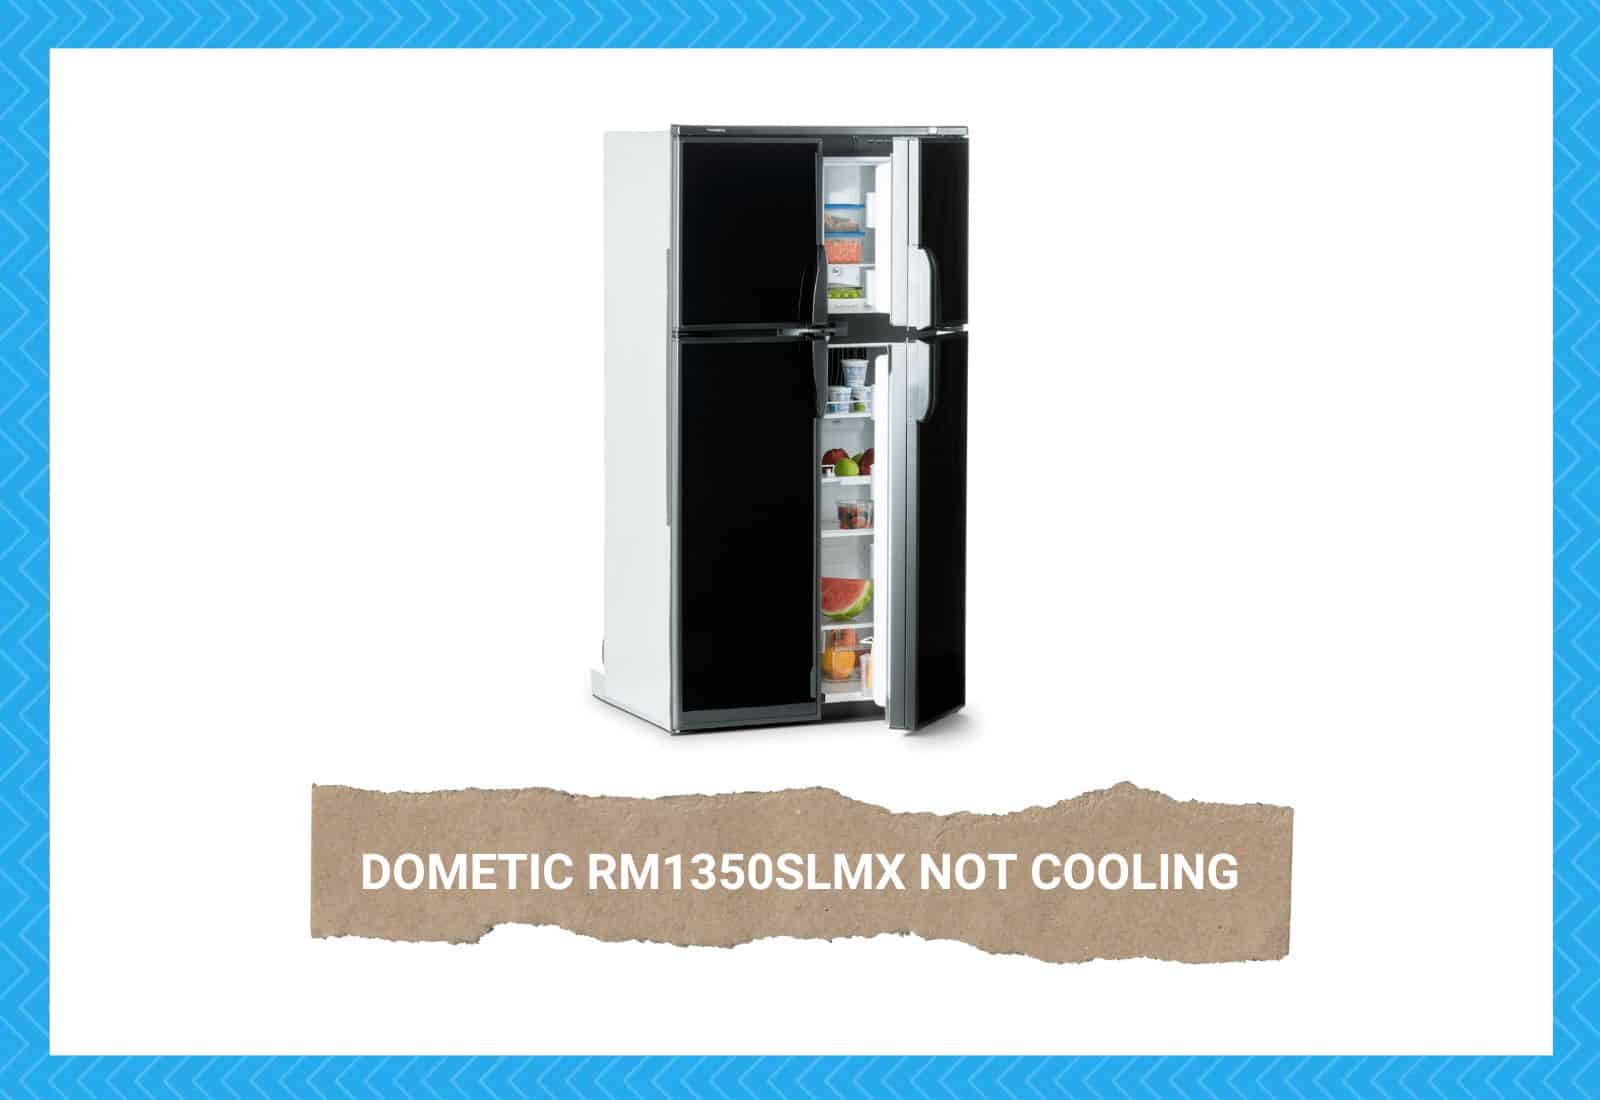 dometic rm1350slmx not cooling